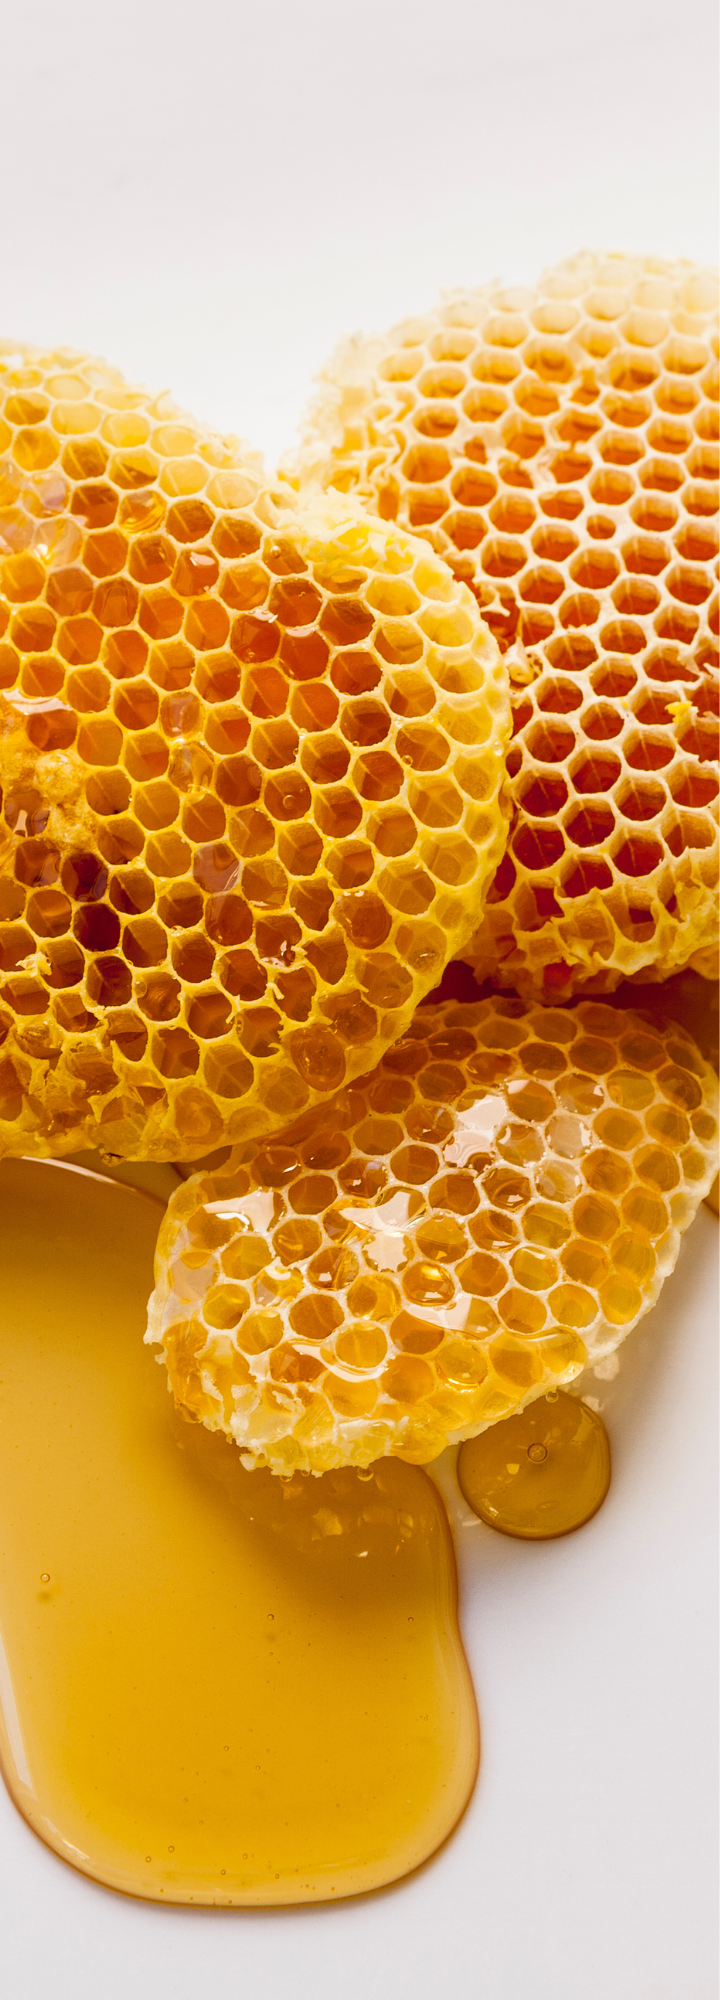 The Different Types of Honey